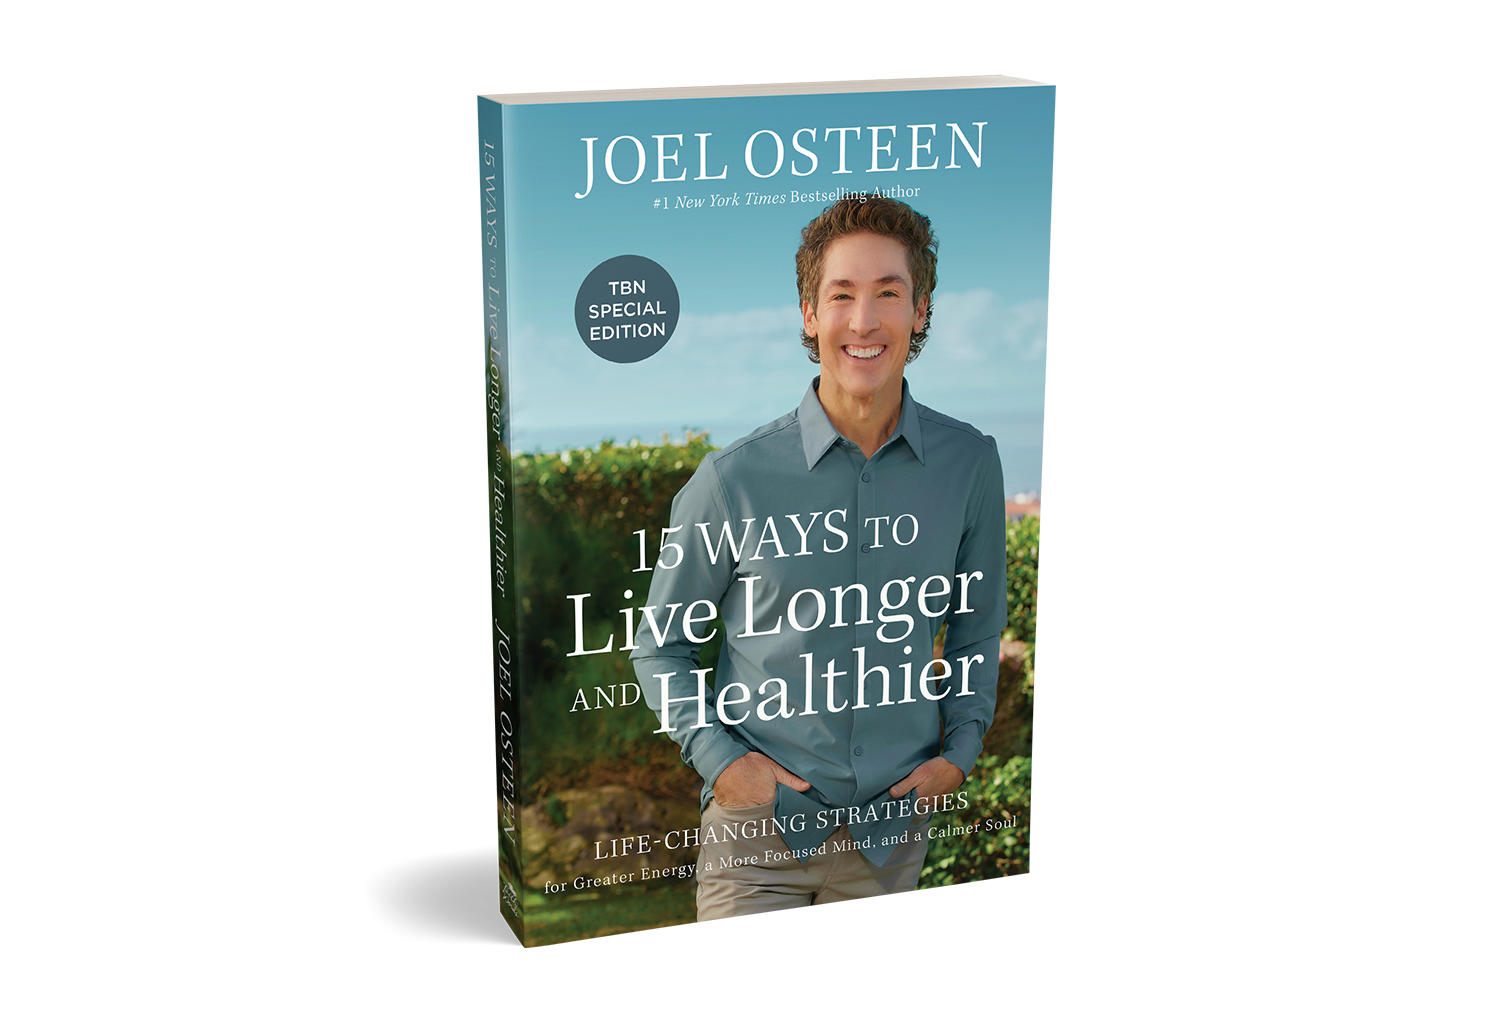 15 Ways to Live Longer and Healthier by Joel Osteen by TBN